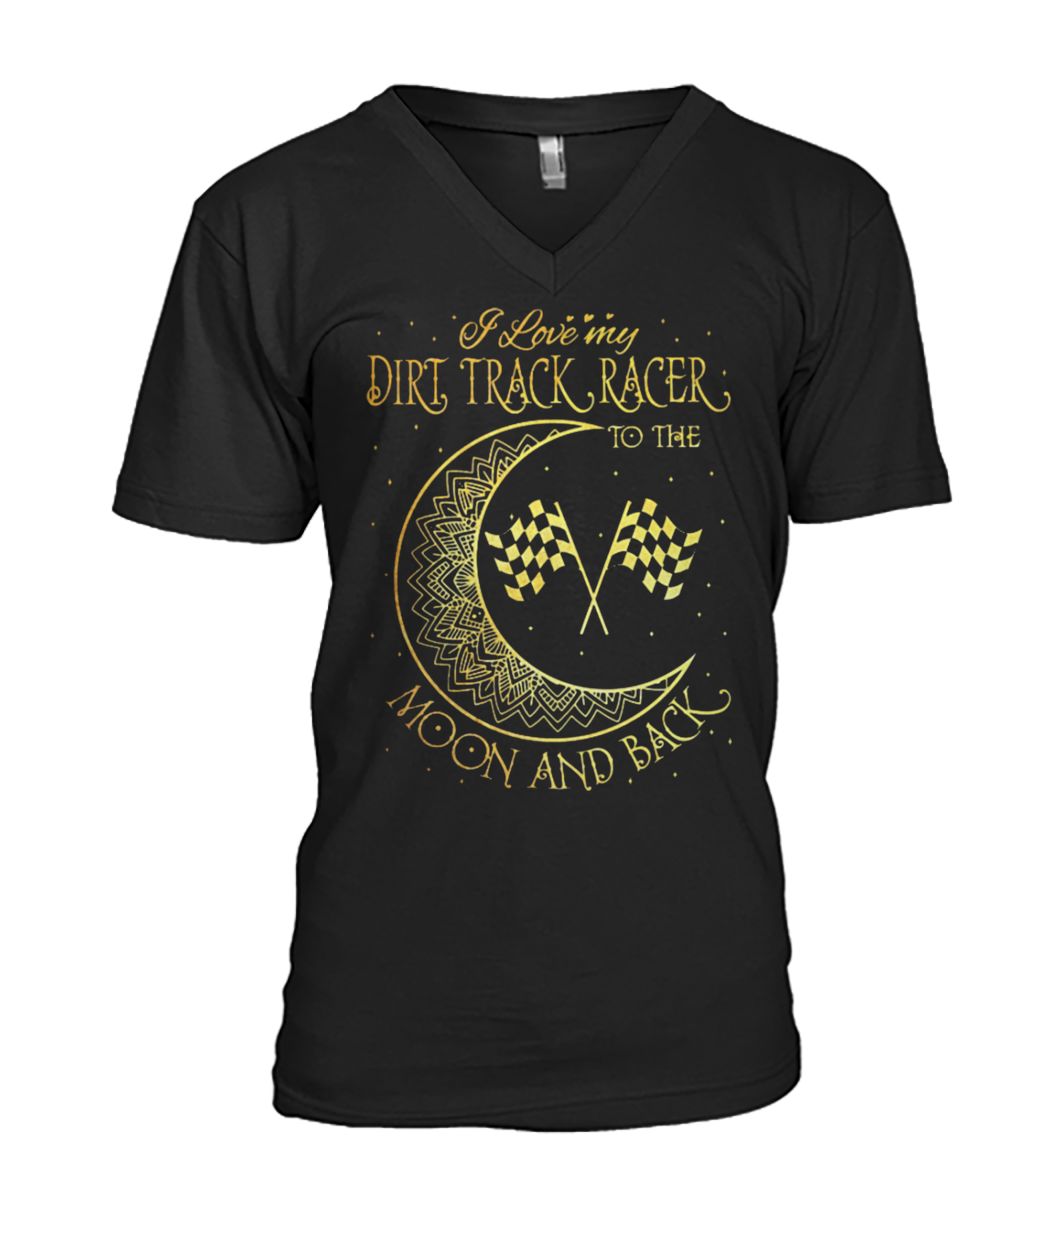 I love my dirt track racer to the moon and back mens v-neck